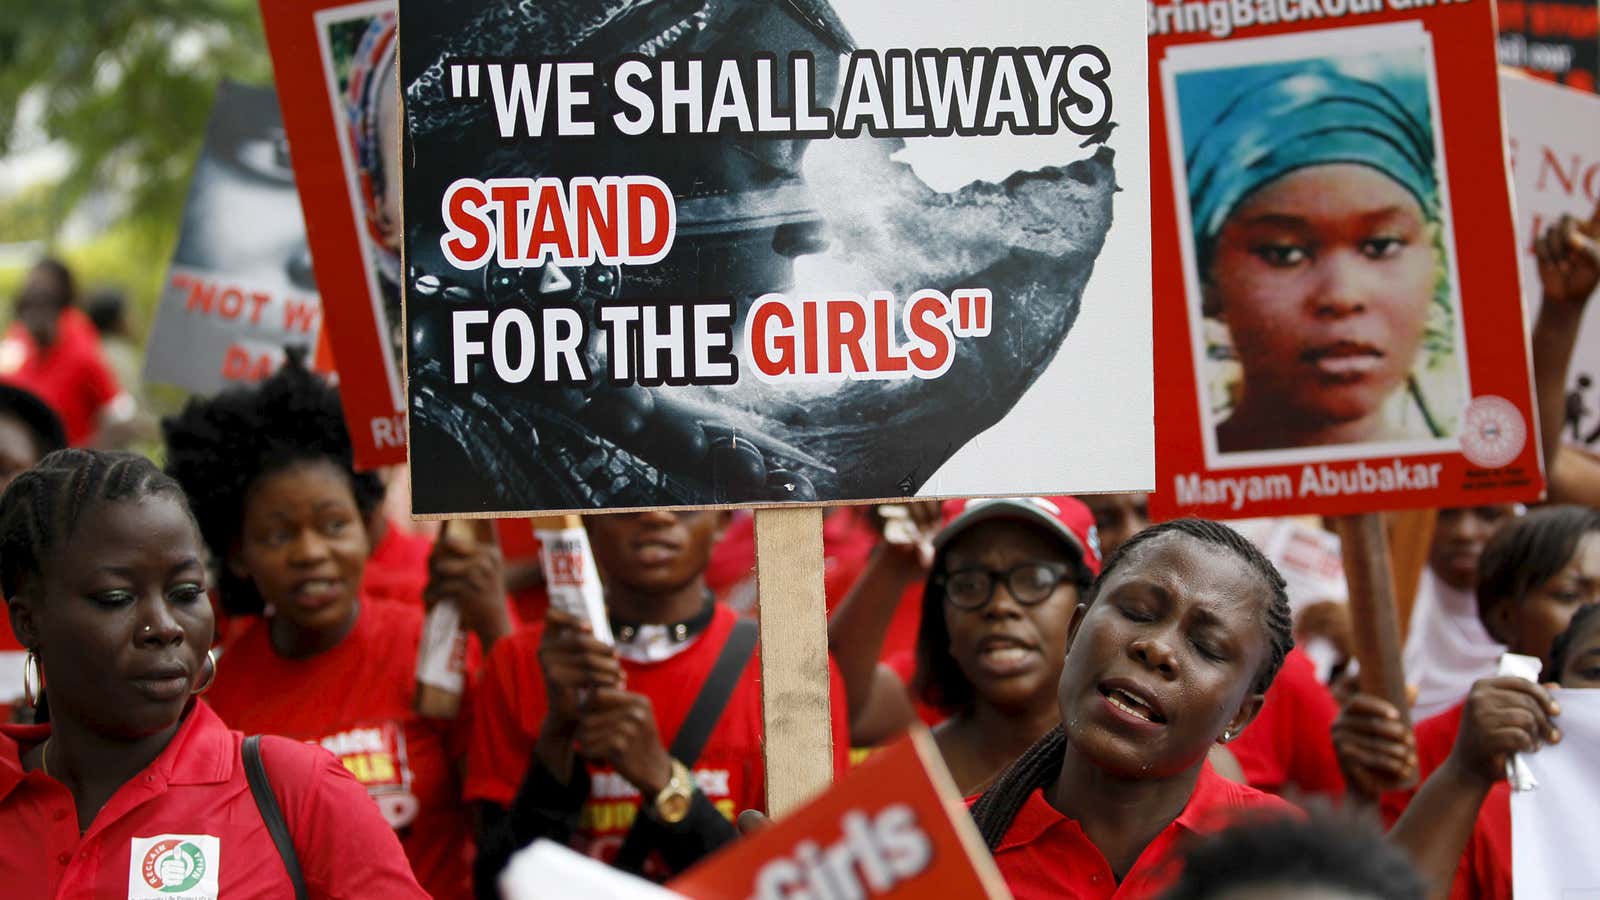 Finally, a glimmer of hope for the Chibok girls.